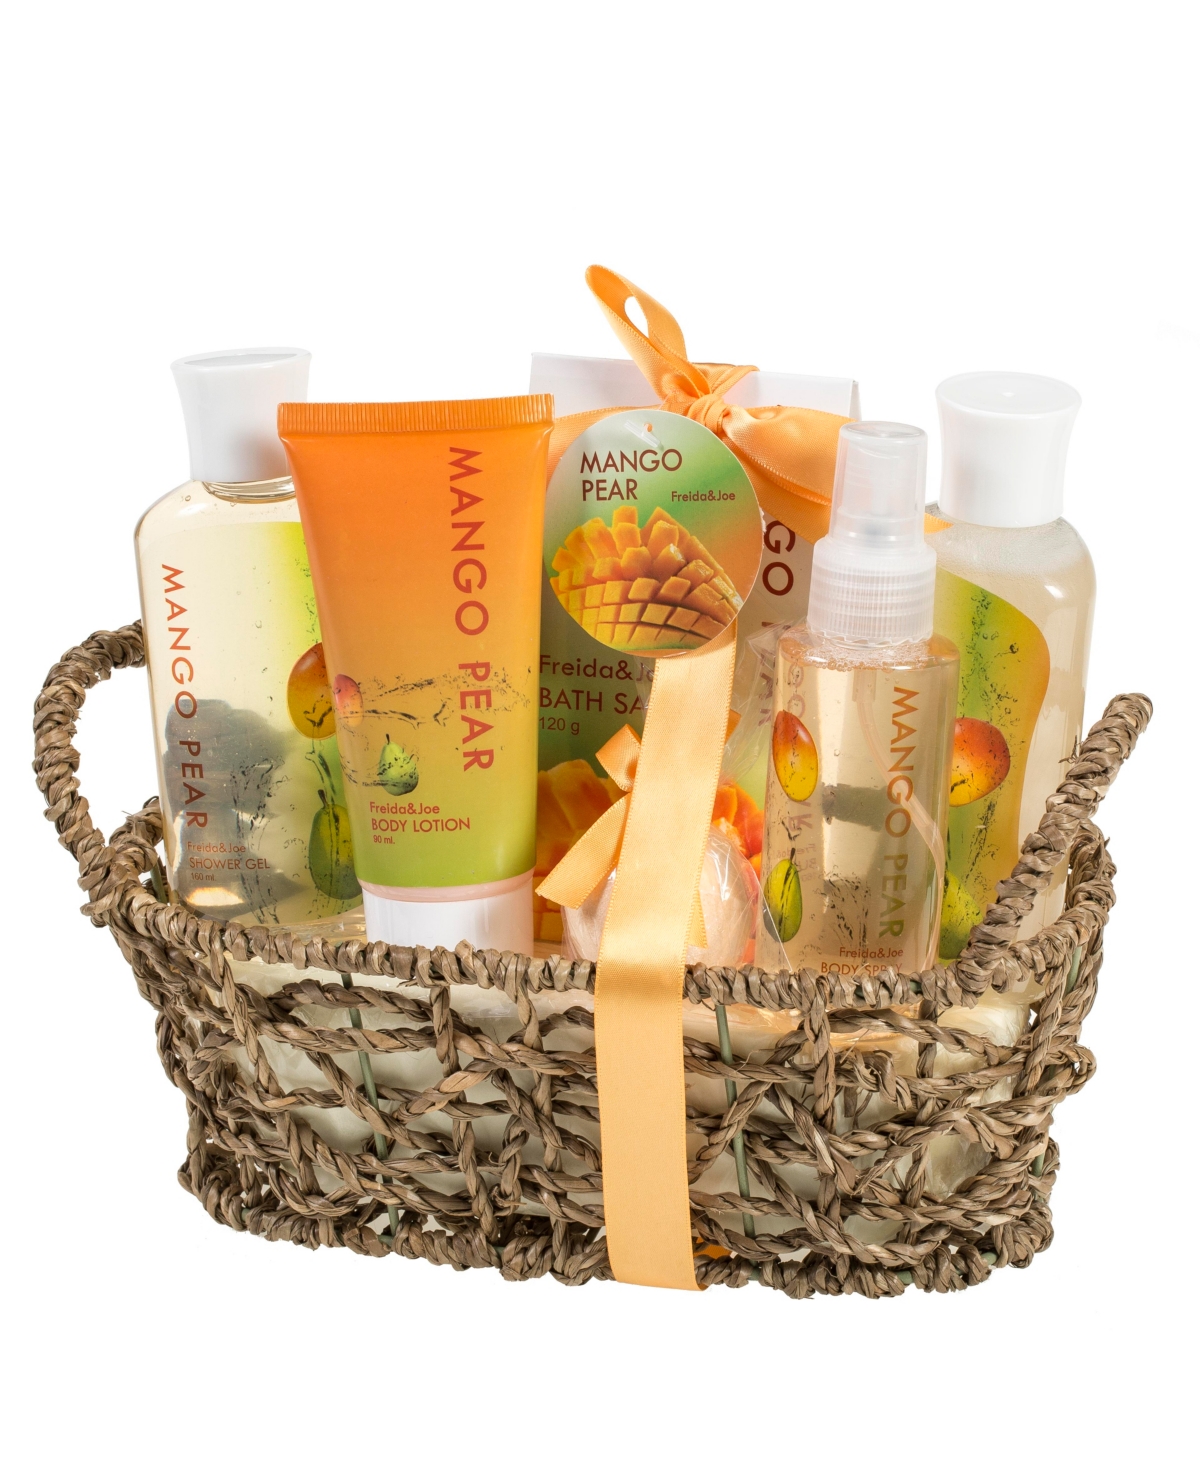 Woven Basket Mango-Pear Fragrance Bath & Body Set Luxury Body Care Mothers Day Gifts for Mom - Assorted Pre-pack